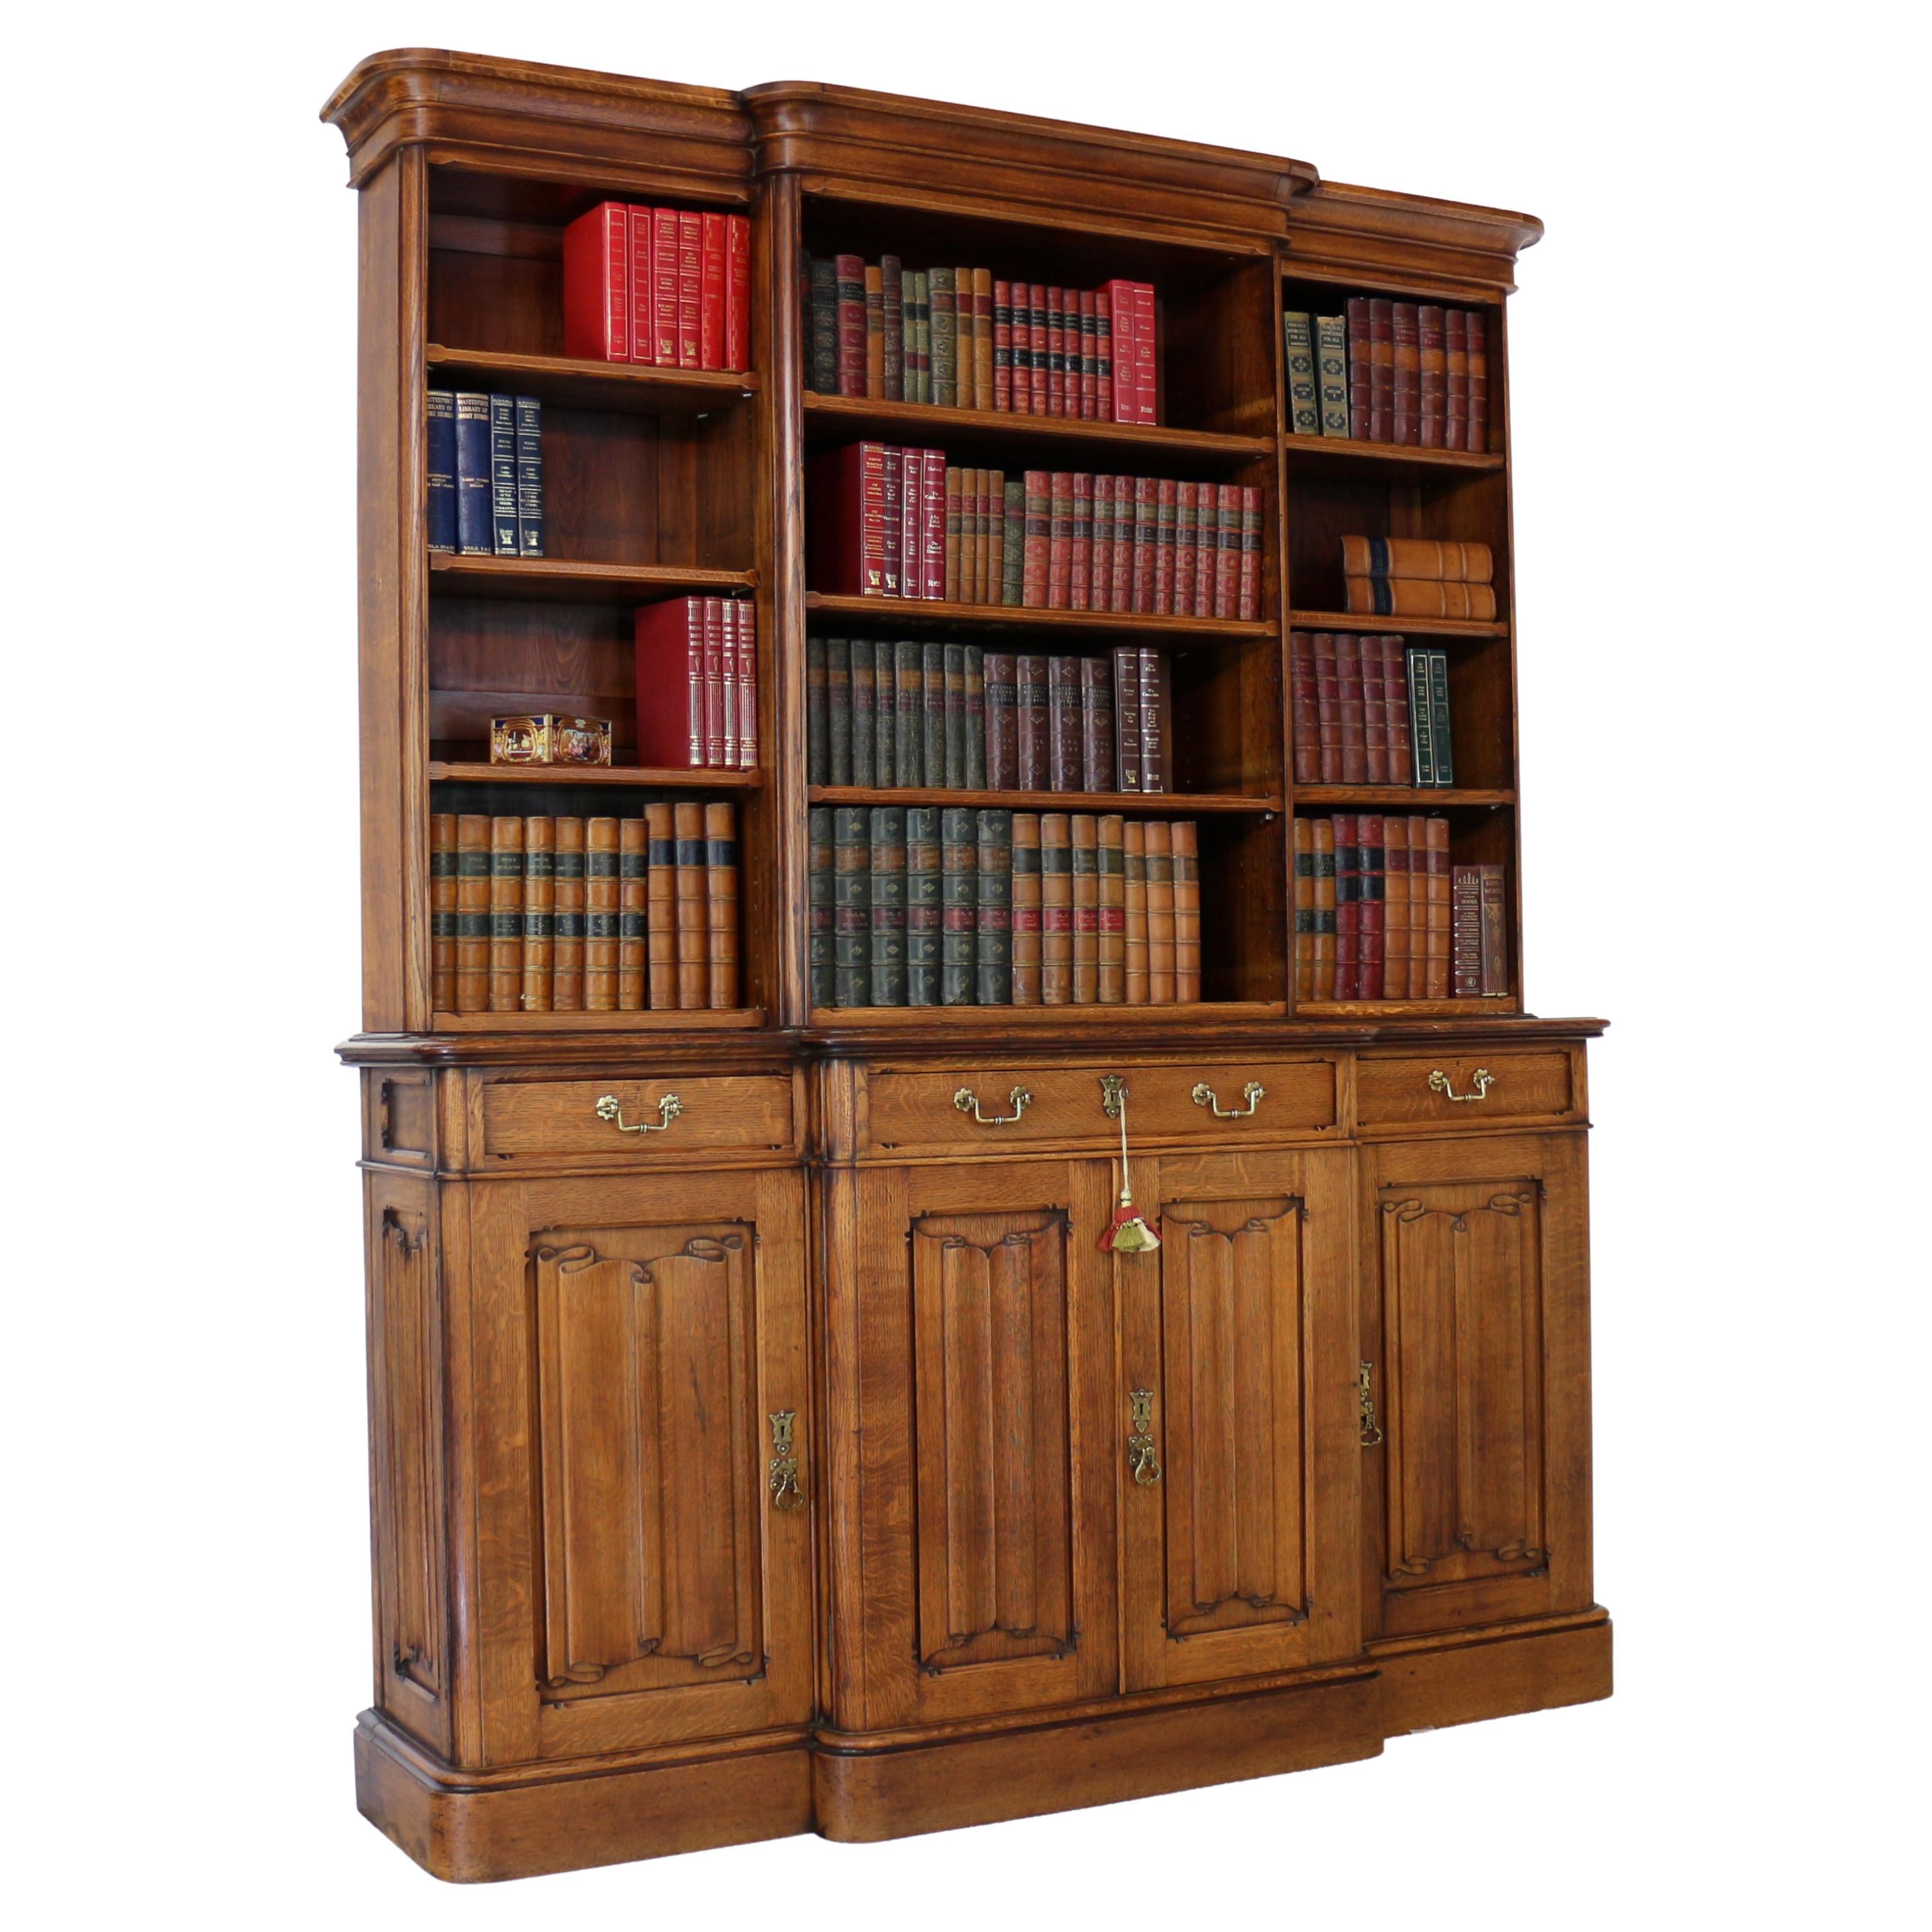 Antique English Victorian Gothic Revival Arts & Crafts Oak Breakfront Bookcase For Sale